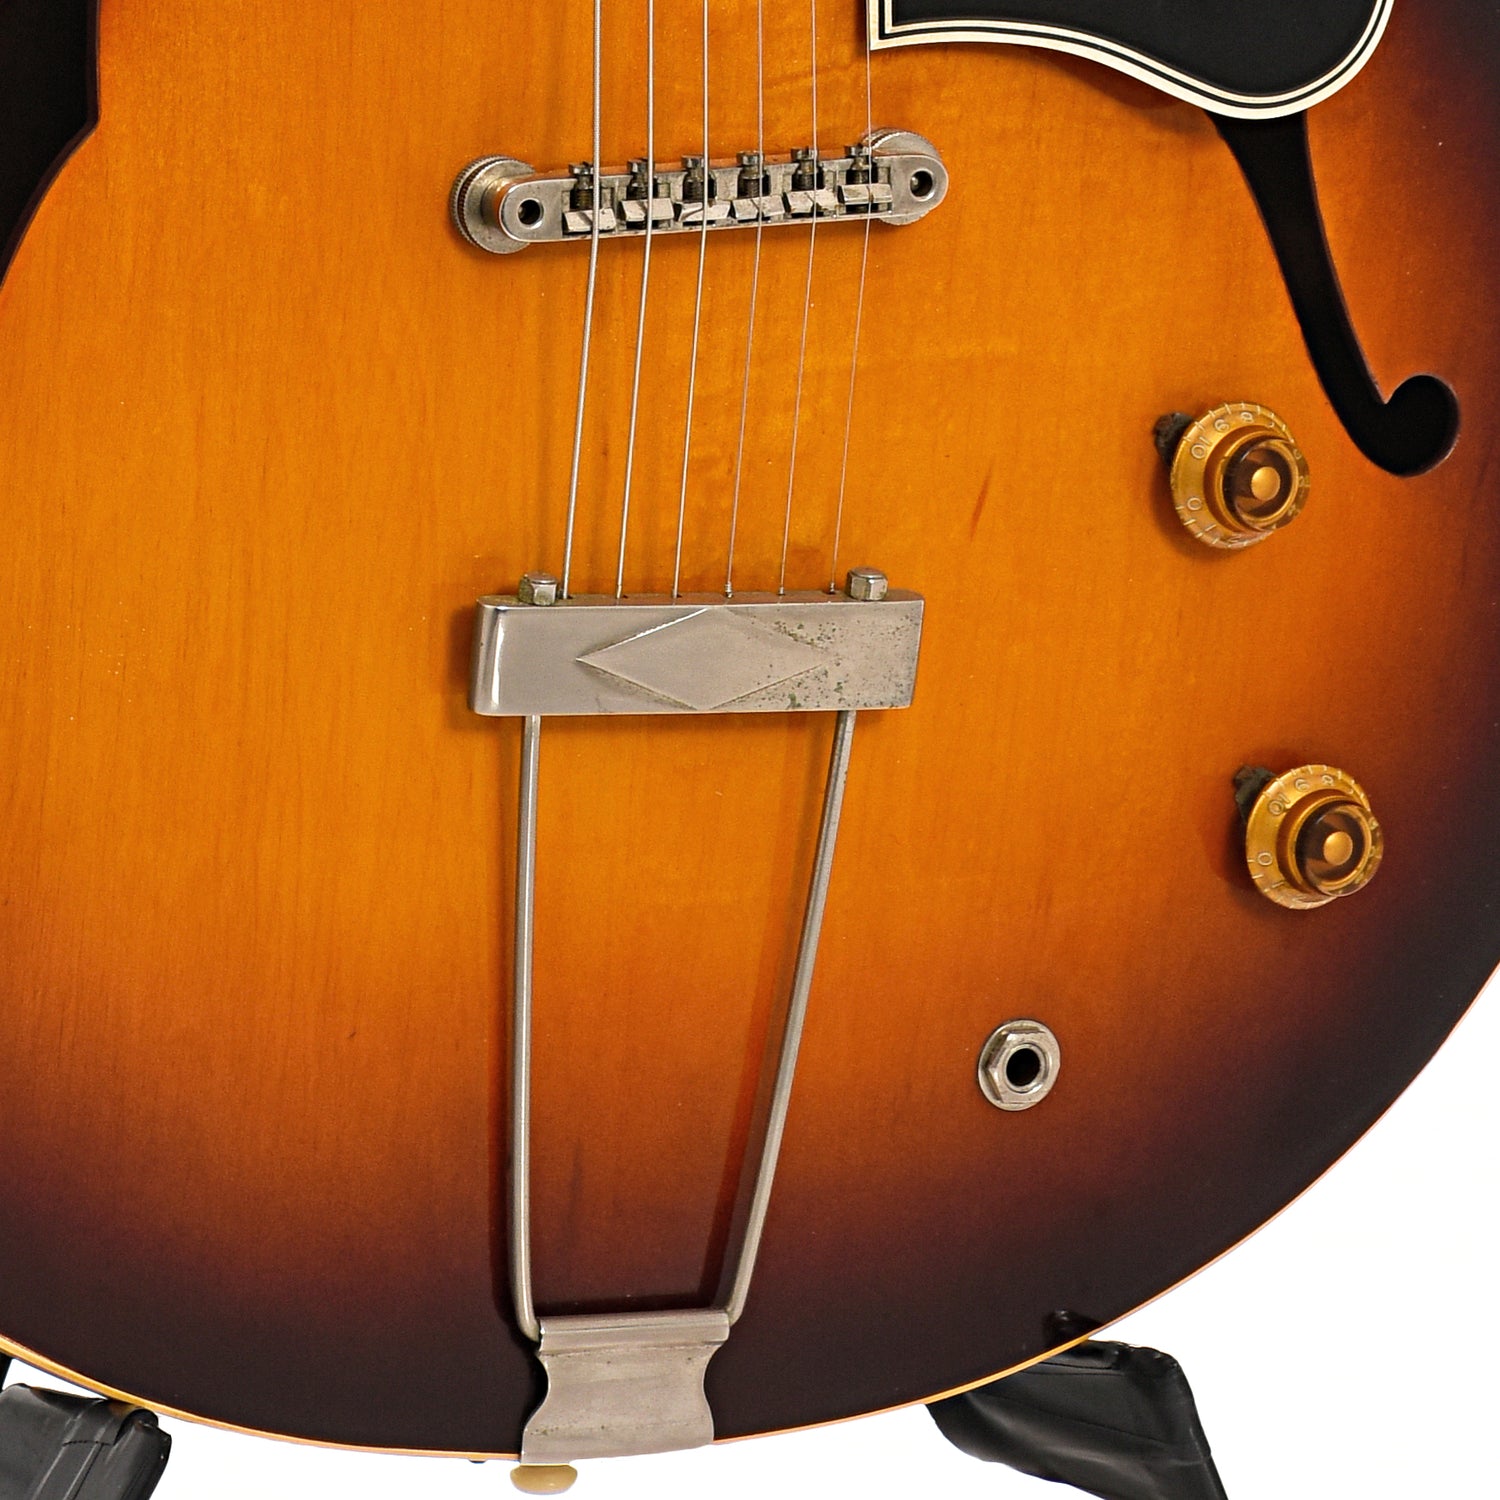 Tailpiece and bridge of Gibson ES-330T Hollow Body